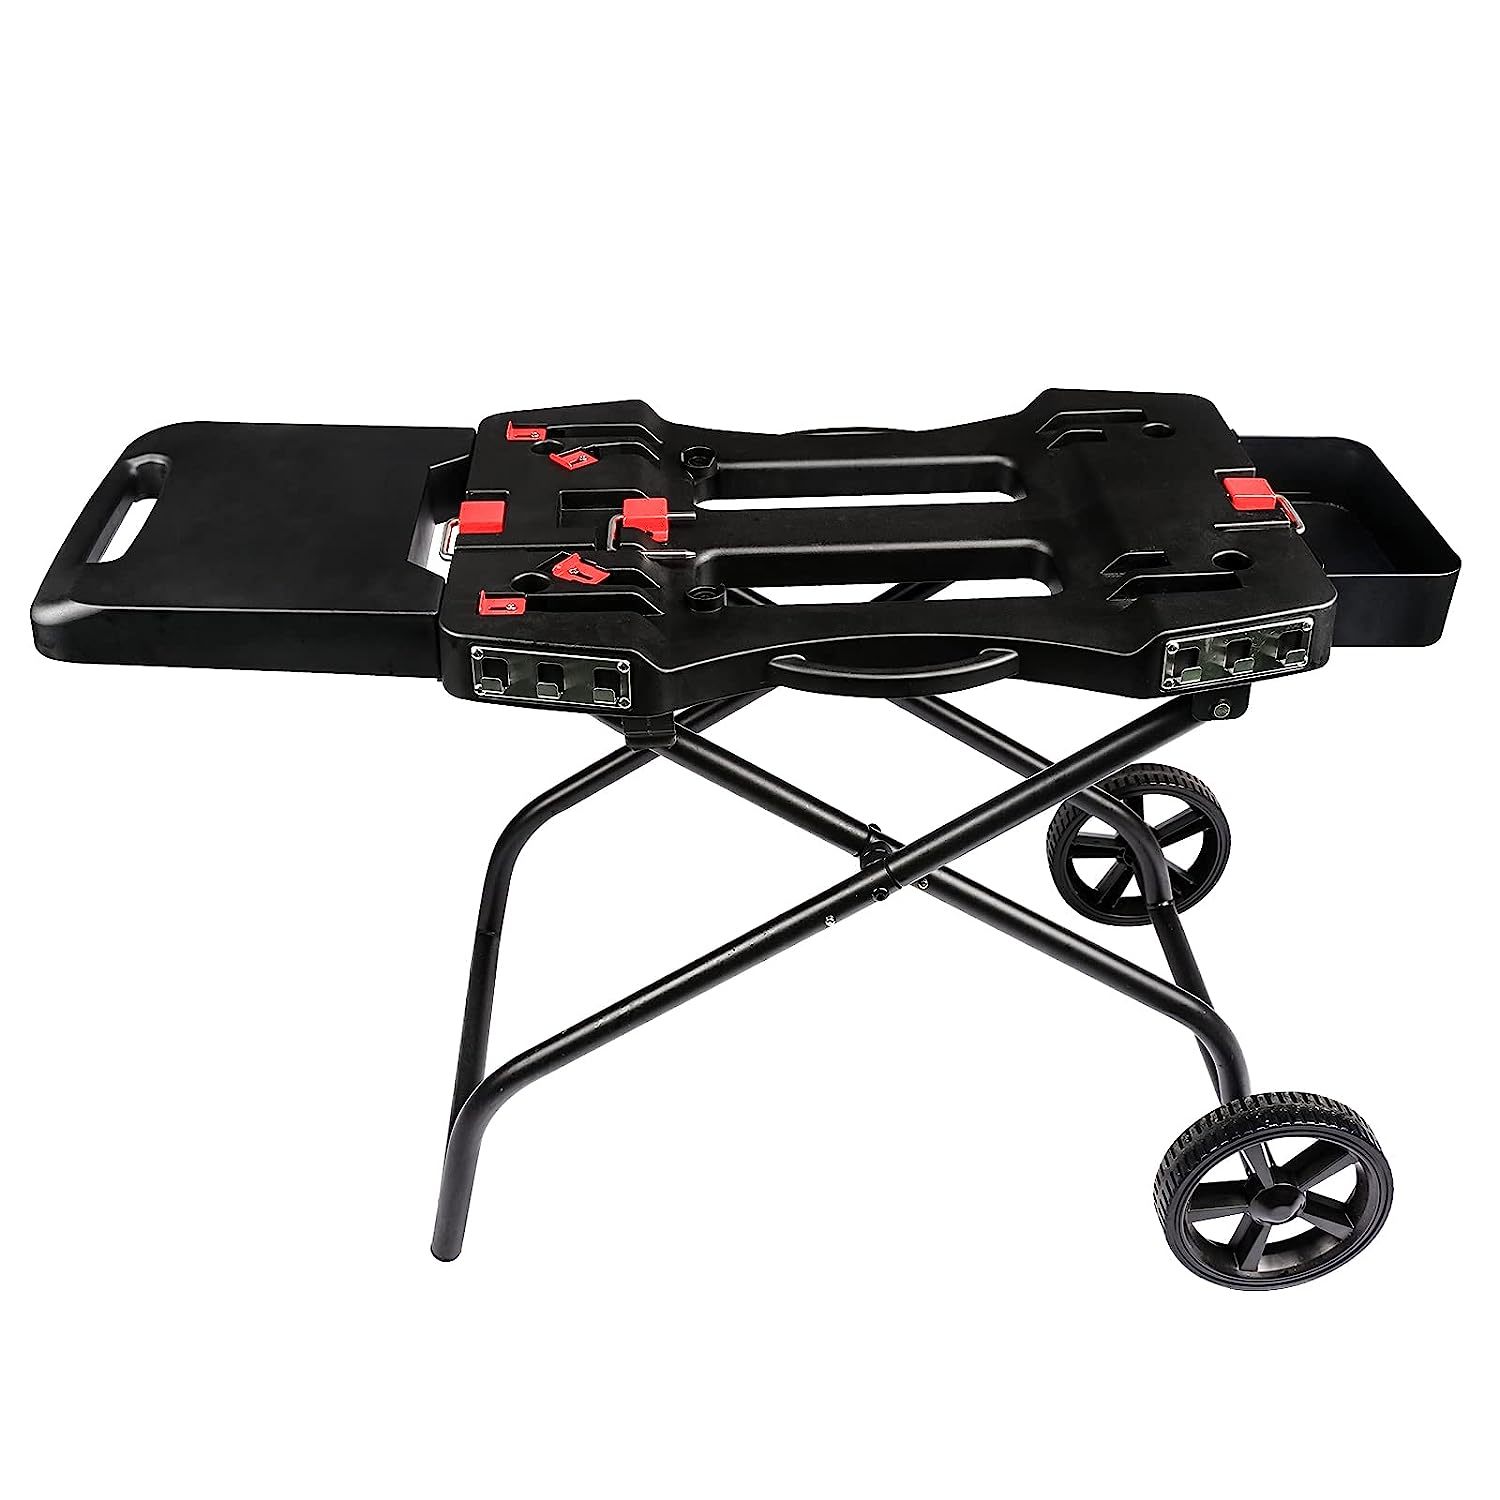 Primary image for Portable Grill Cart For Weber Q1200, Q1000, Q2200, Q2000 Series, For Blackstone 